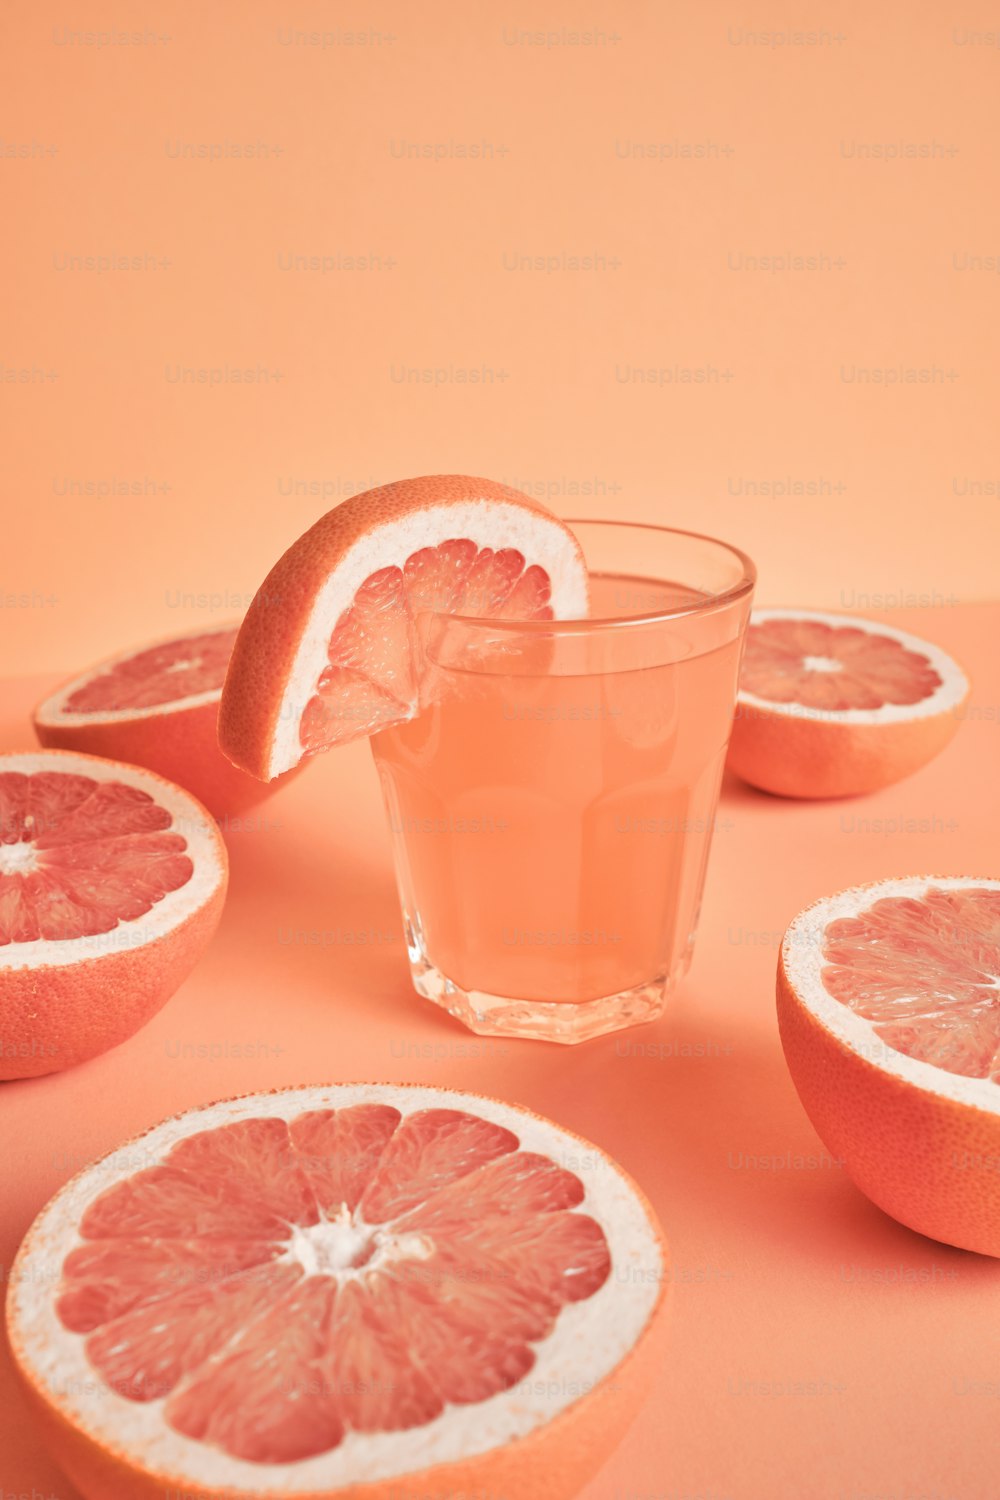 grapefruits and a glass of water on a table